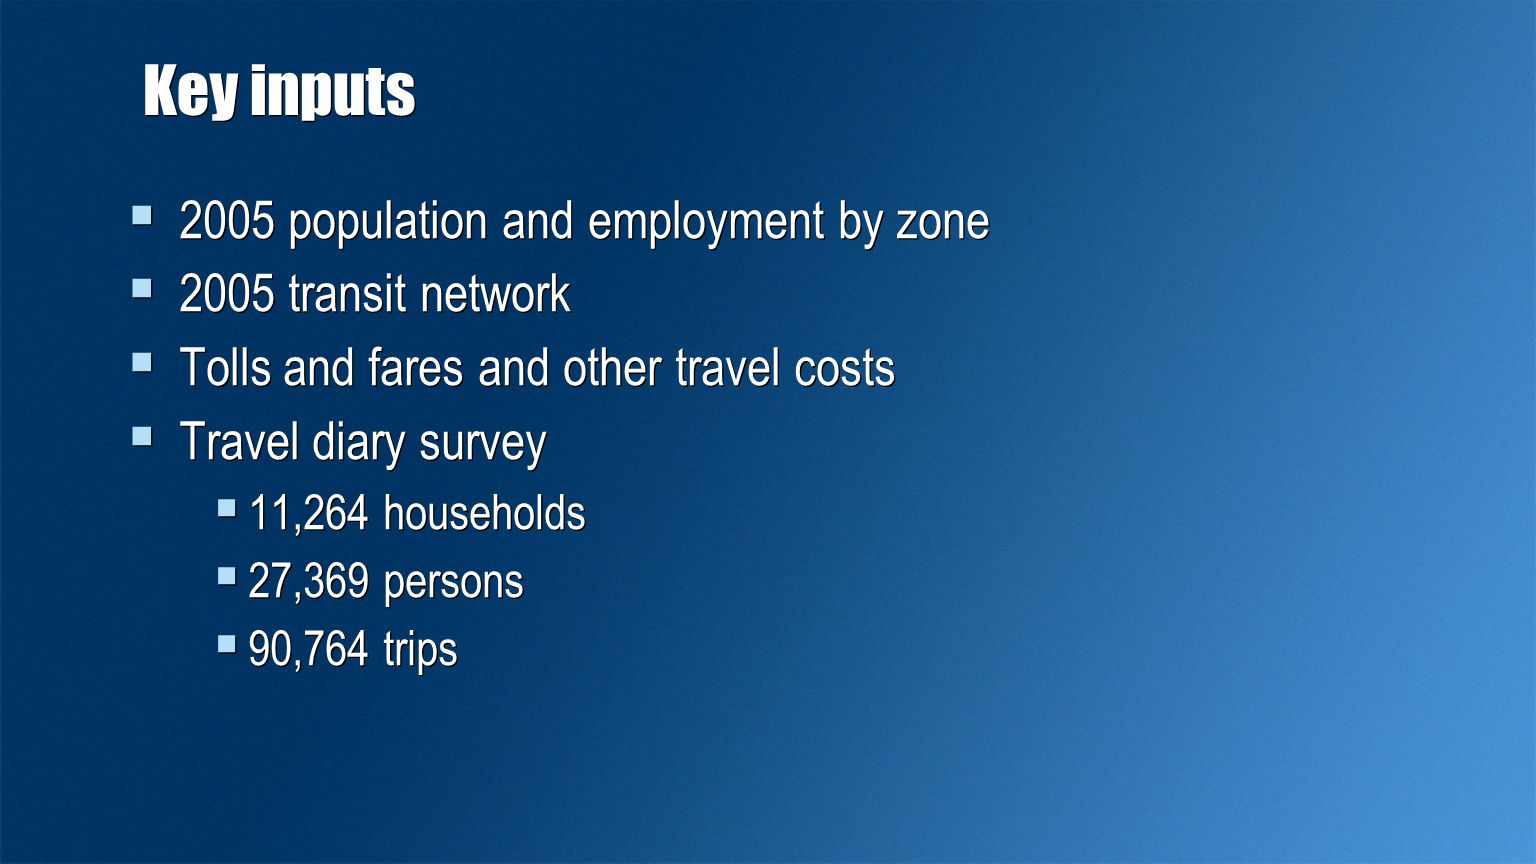 Key inputs  2005 population and employment by zone  2005 transit network  Tolls and fares and other travel costs  Travel diary survey  11,264 households  27,369 persons  90,764 trips  2005 population and employment by zone  2005 transit network  Tolls and fares and other travel costs  Travel diary survey  11,264 households  27,369 persons  90,764 trips